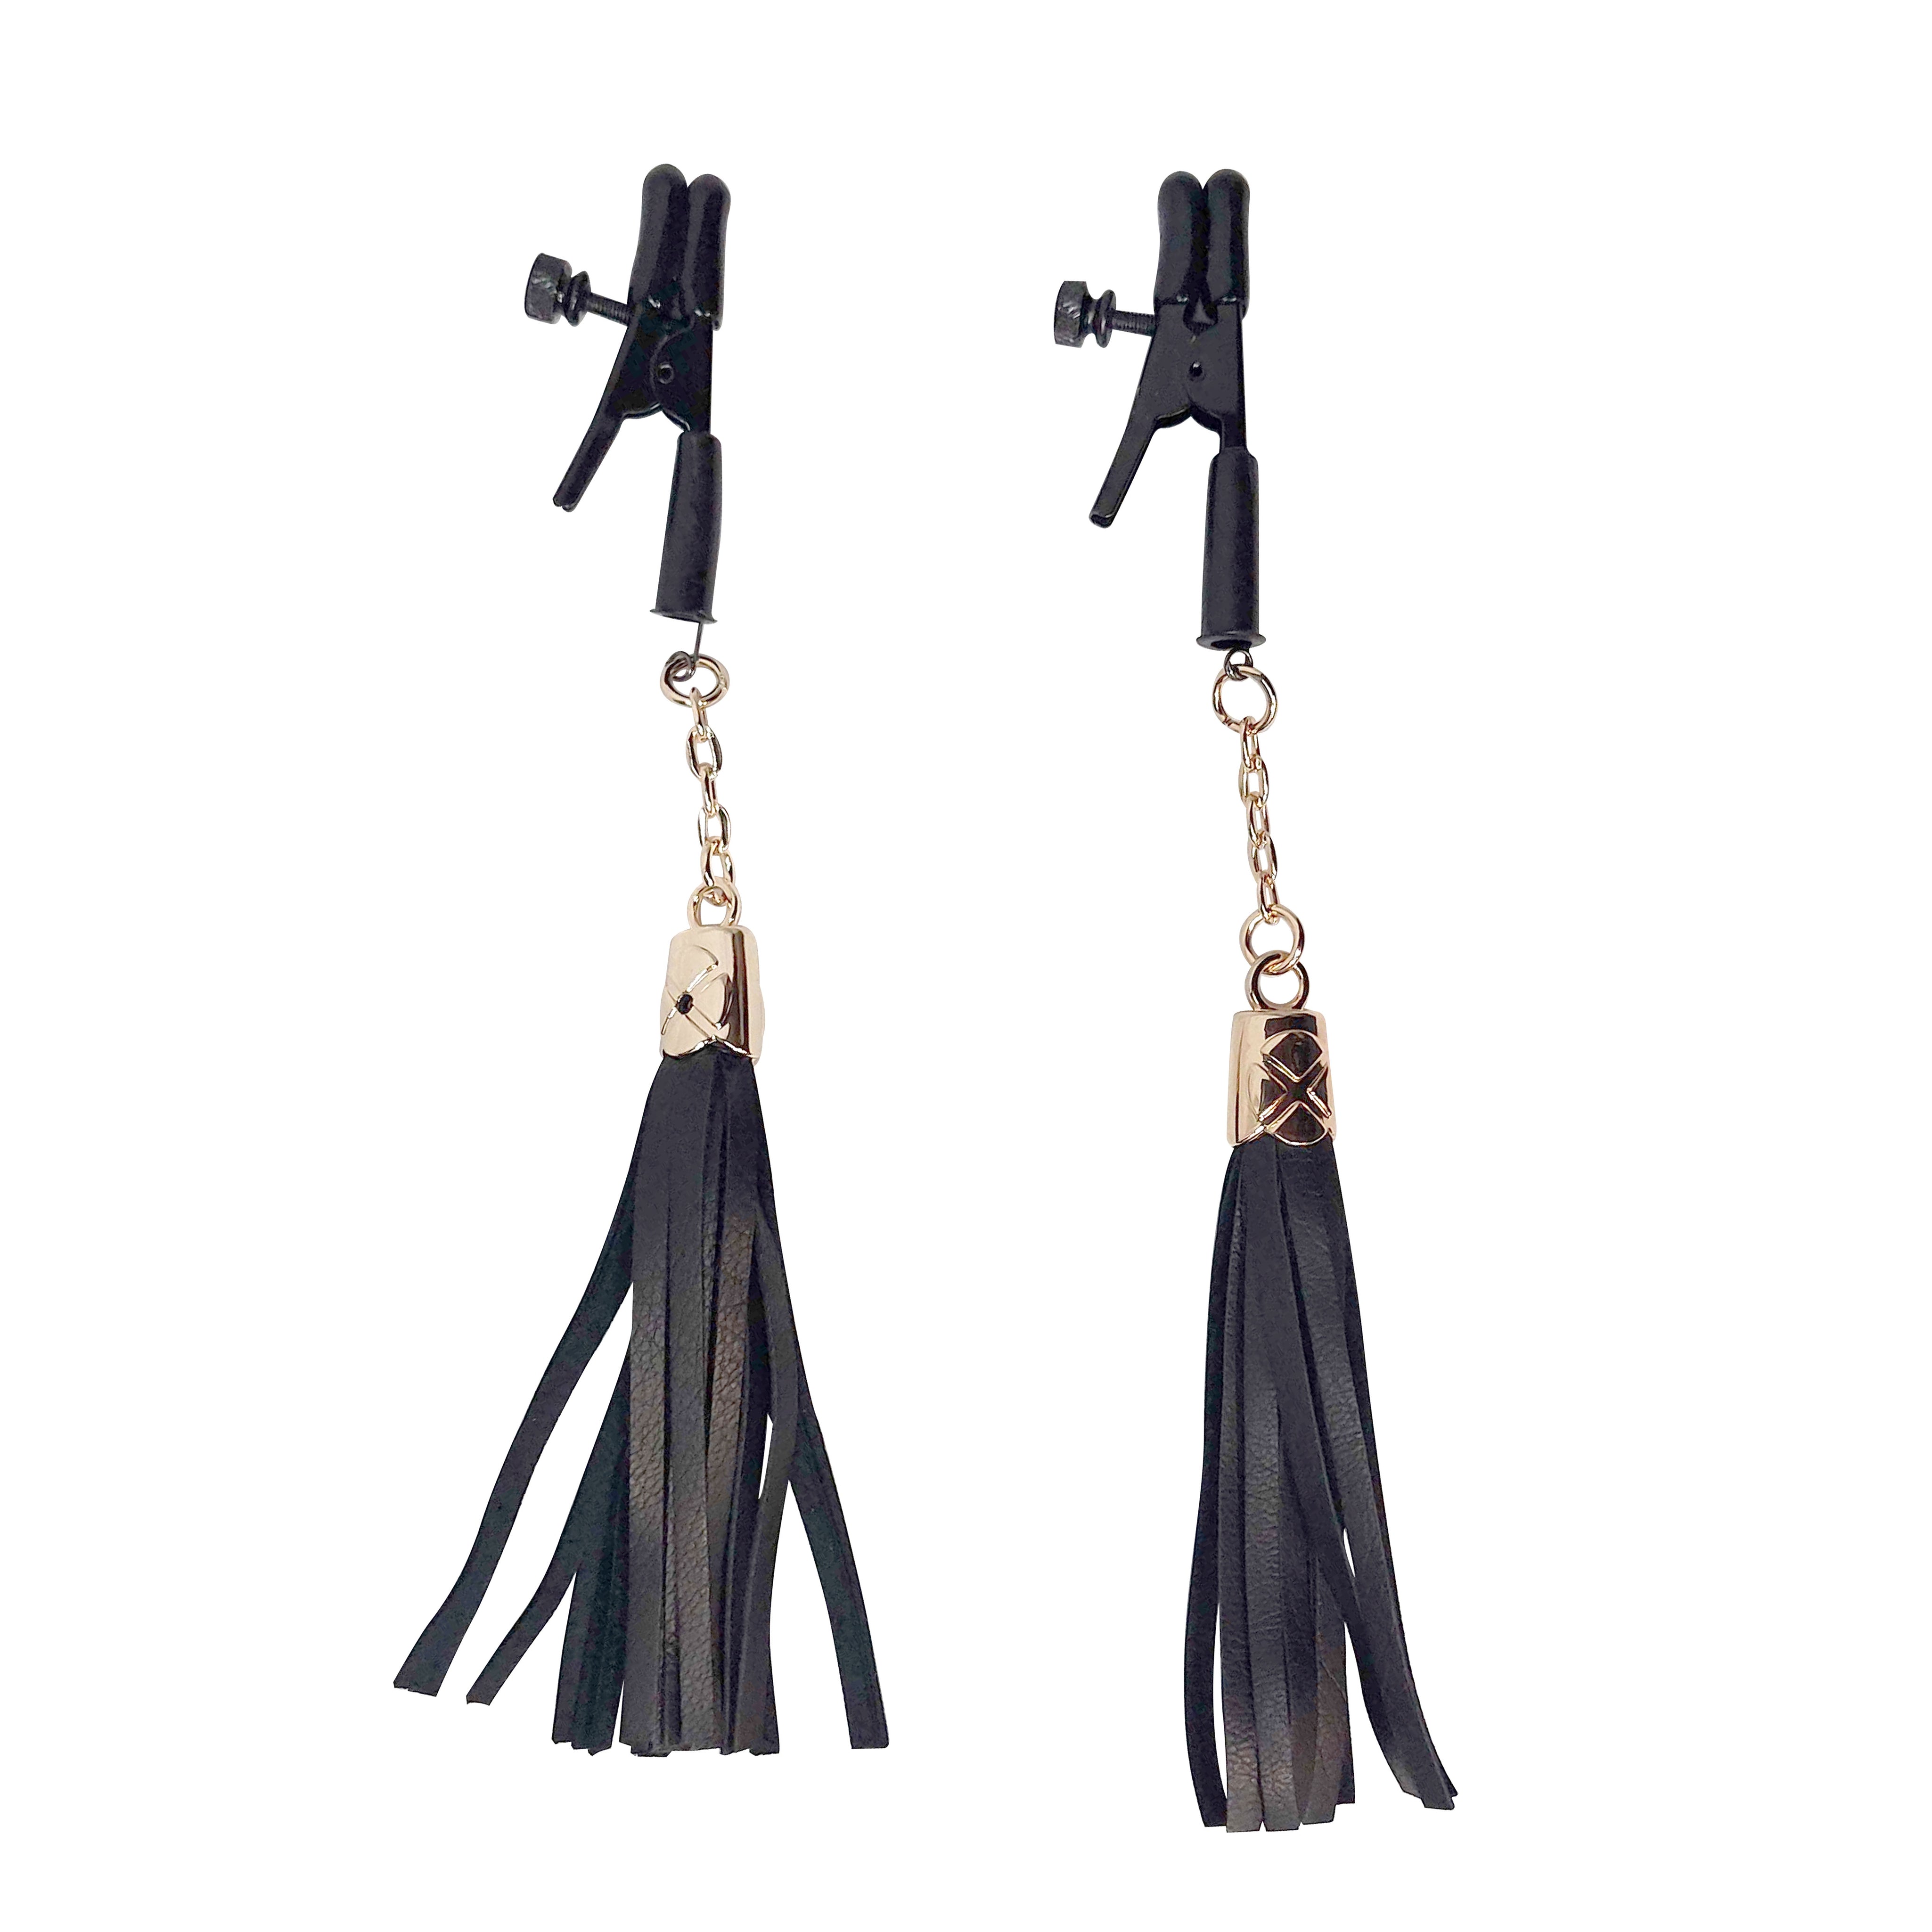 Alligator Tip Nipple Clamps with Leatherette Tassels